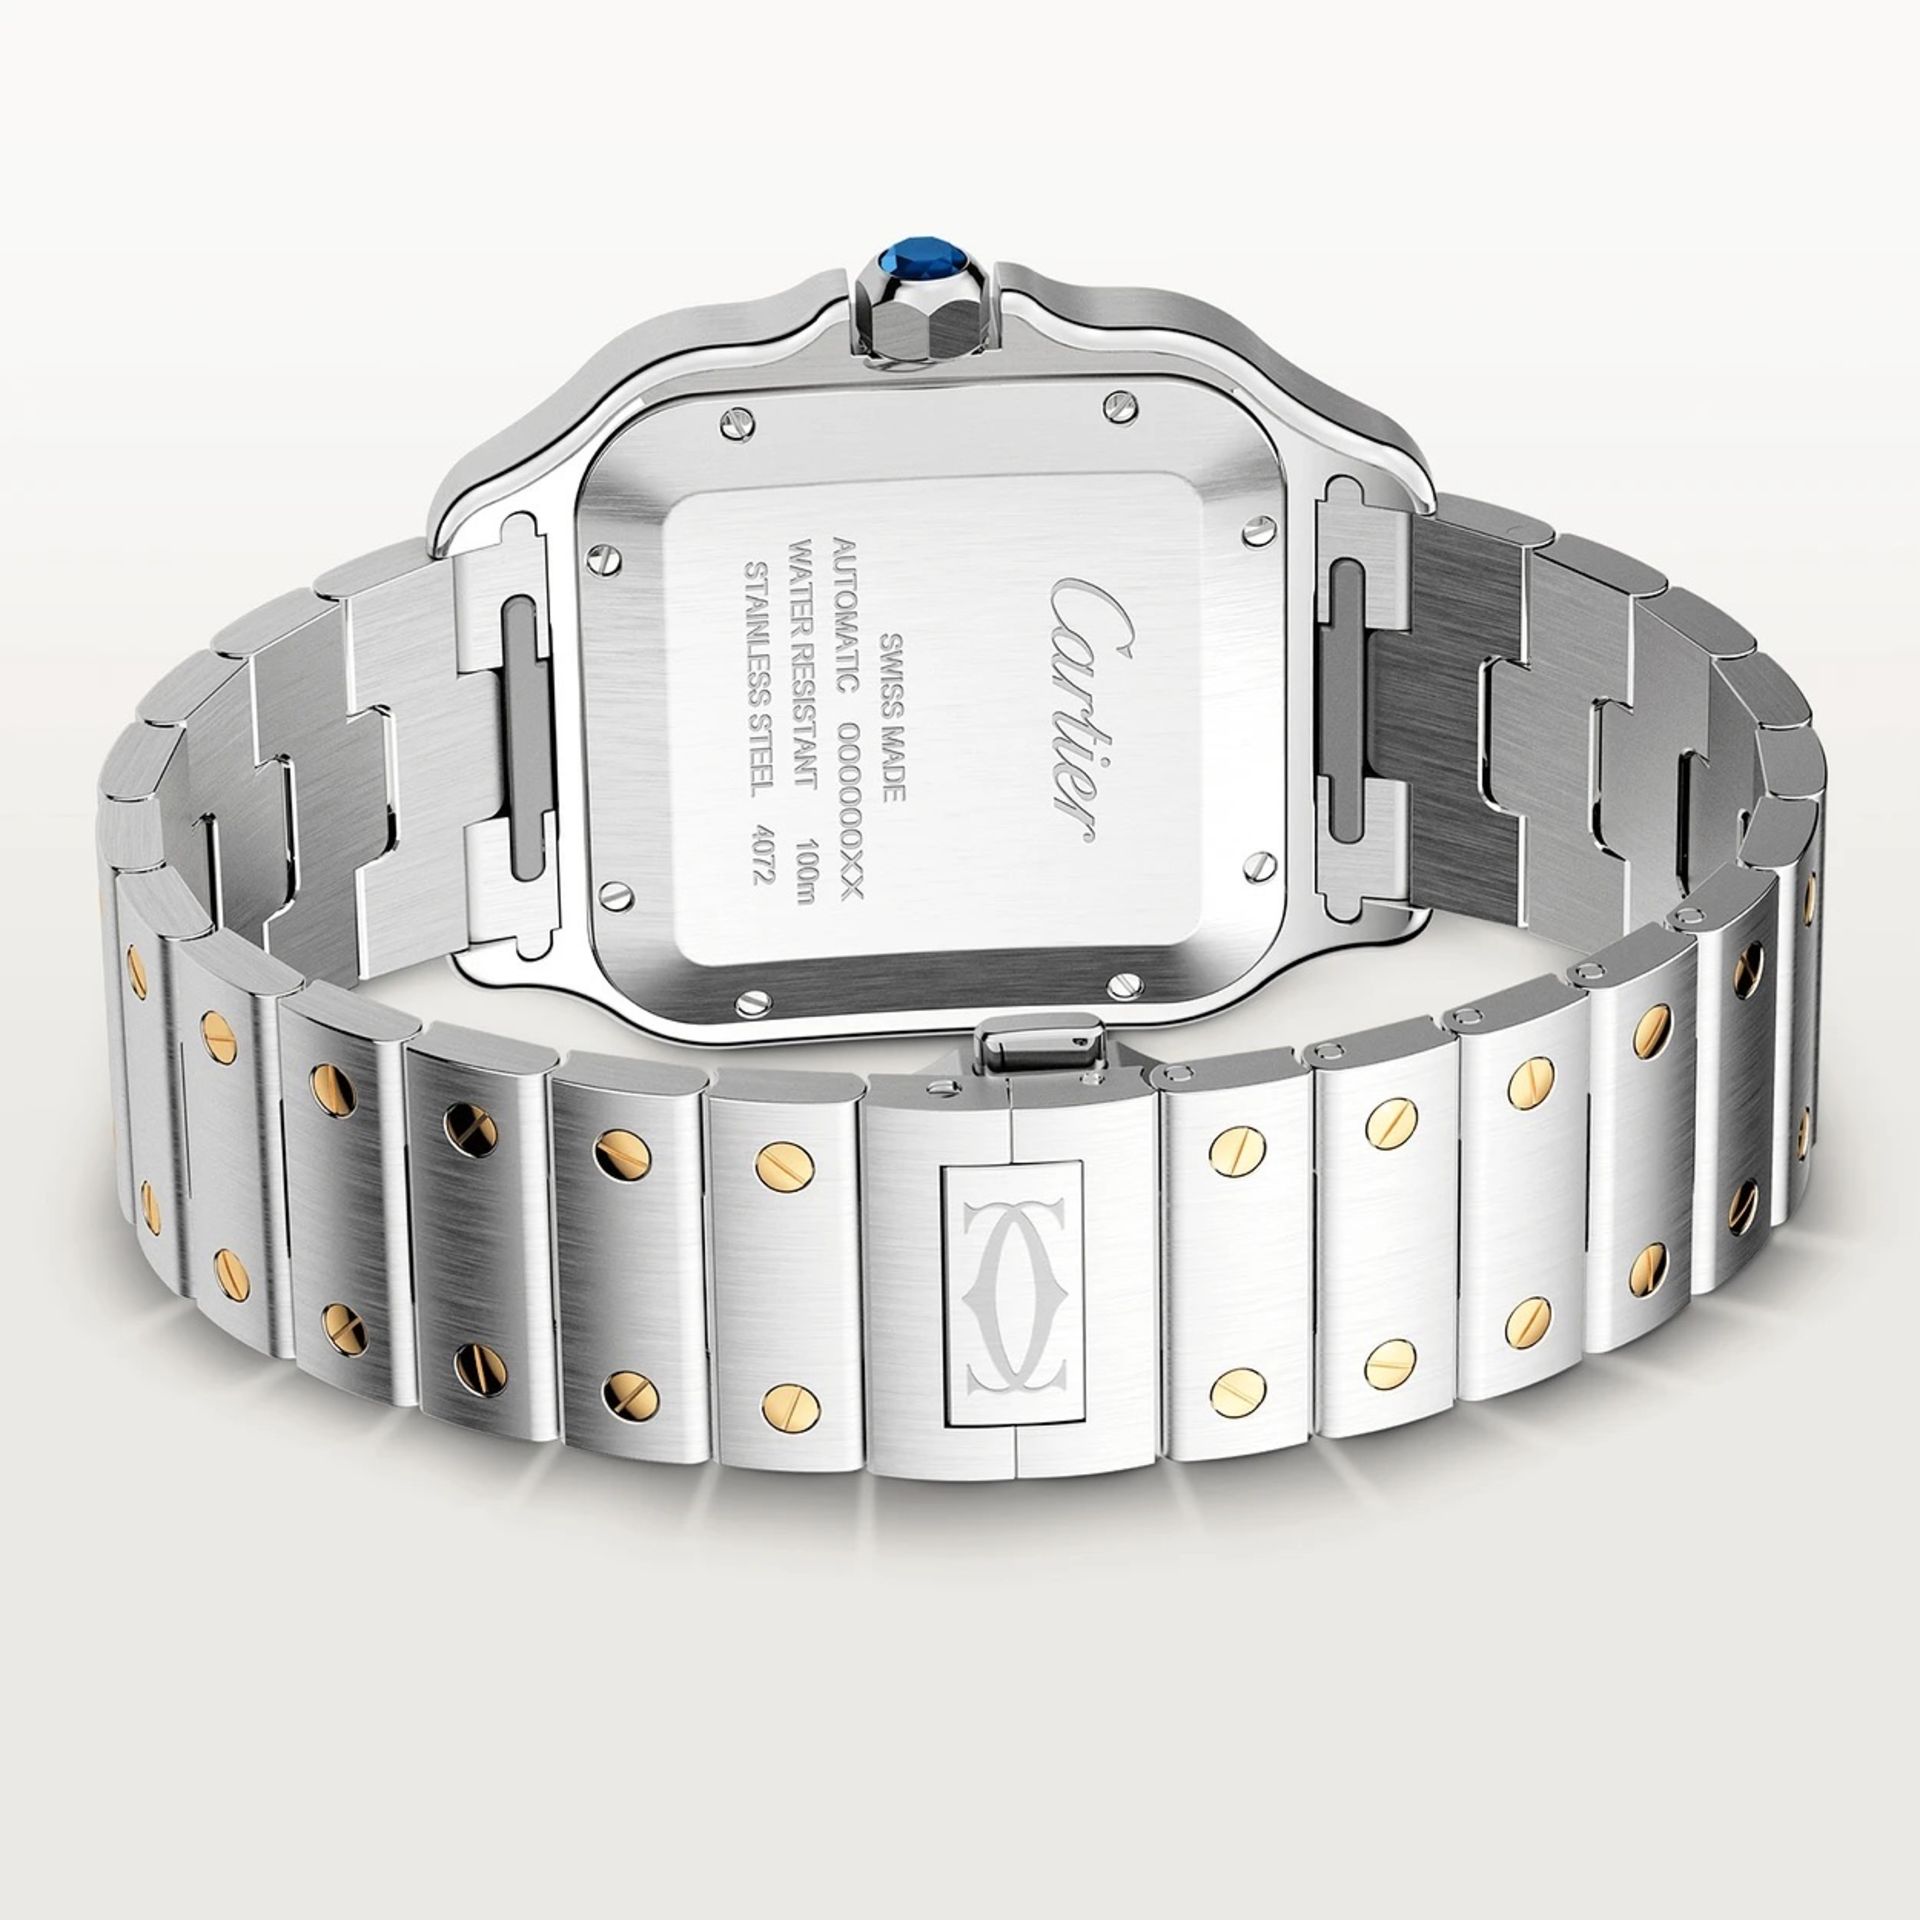 Cartier Santos De Cartier Large Model - Automatic Movement - Yellow Gold Stainless Steel White Dial - Image 8 of 12